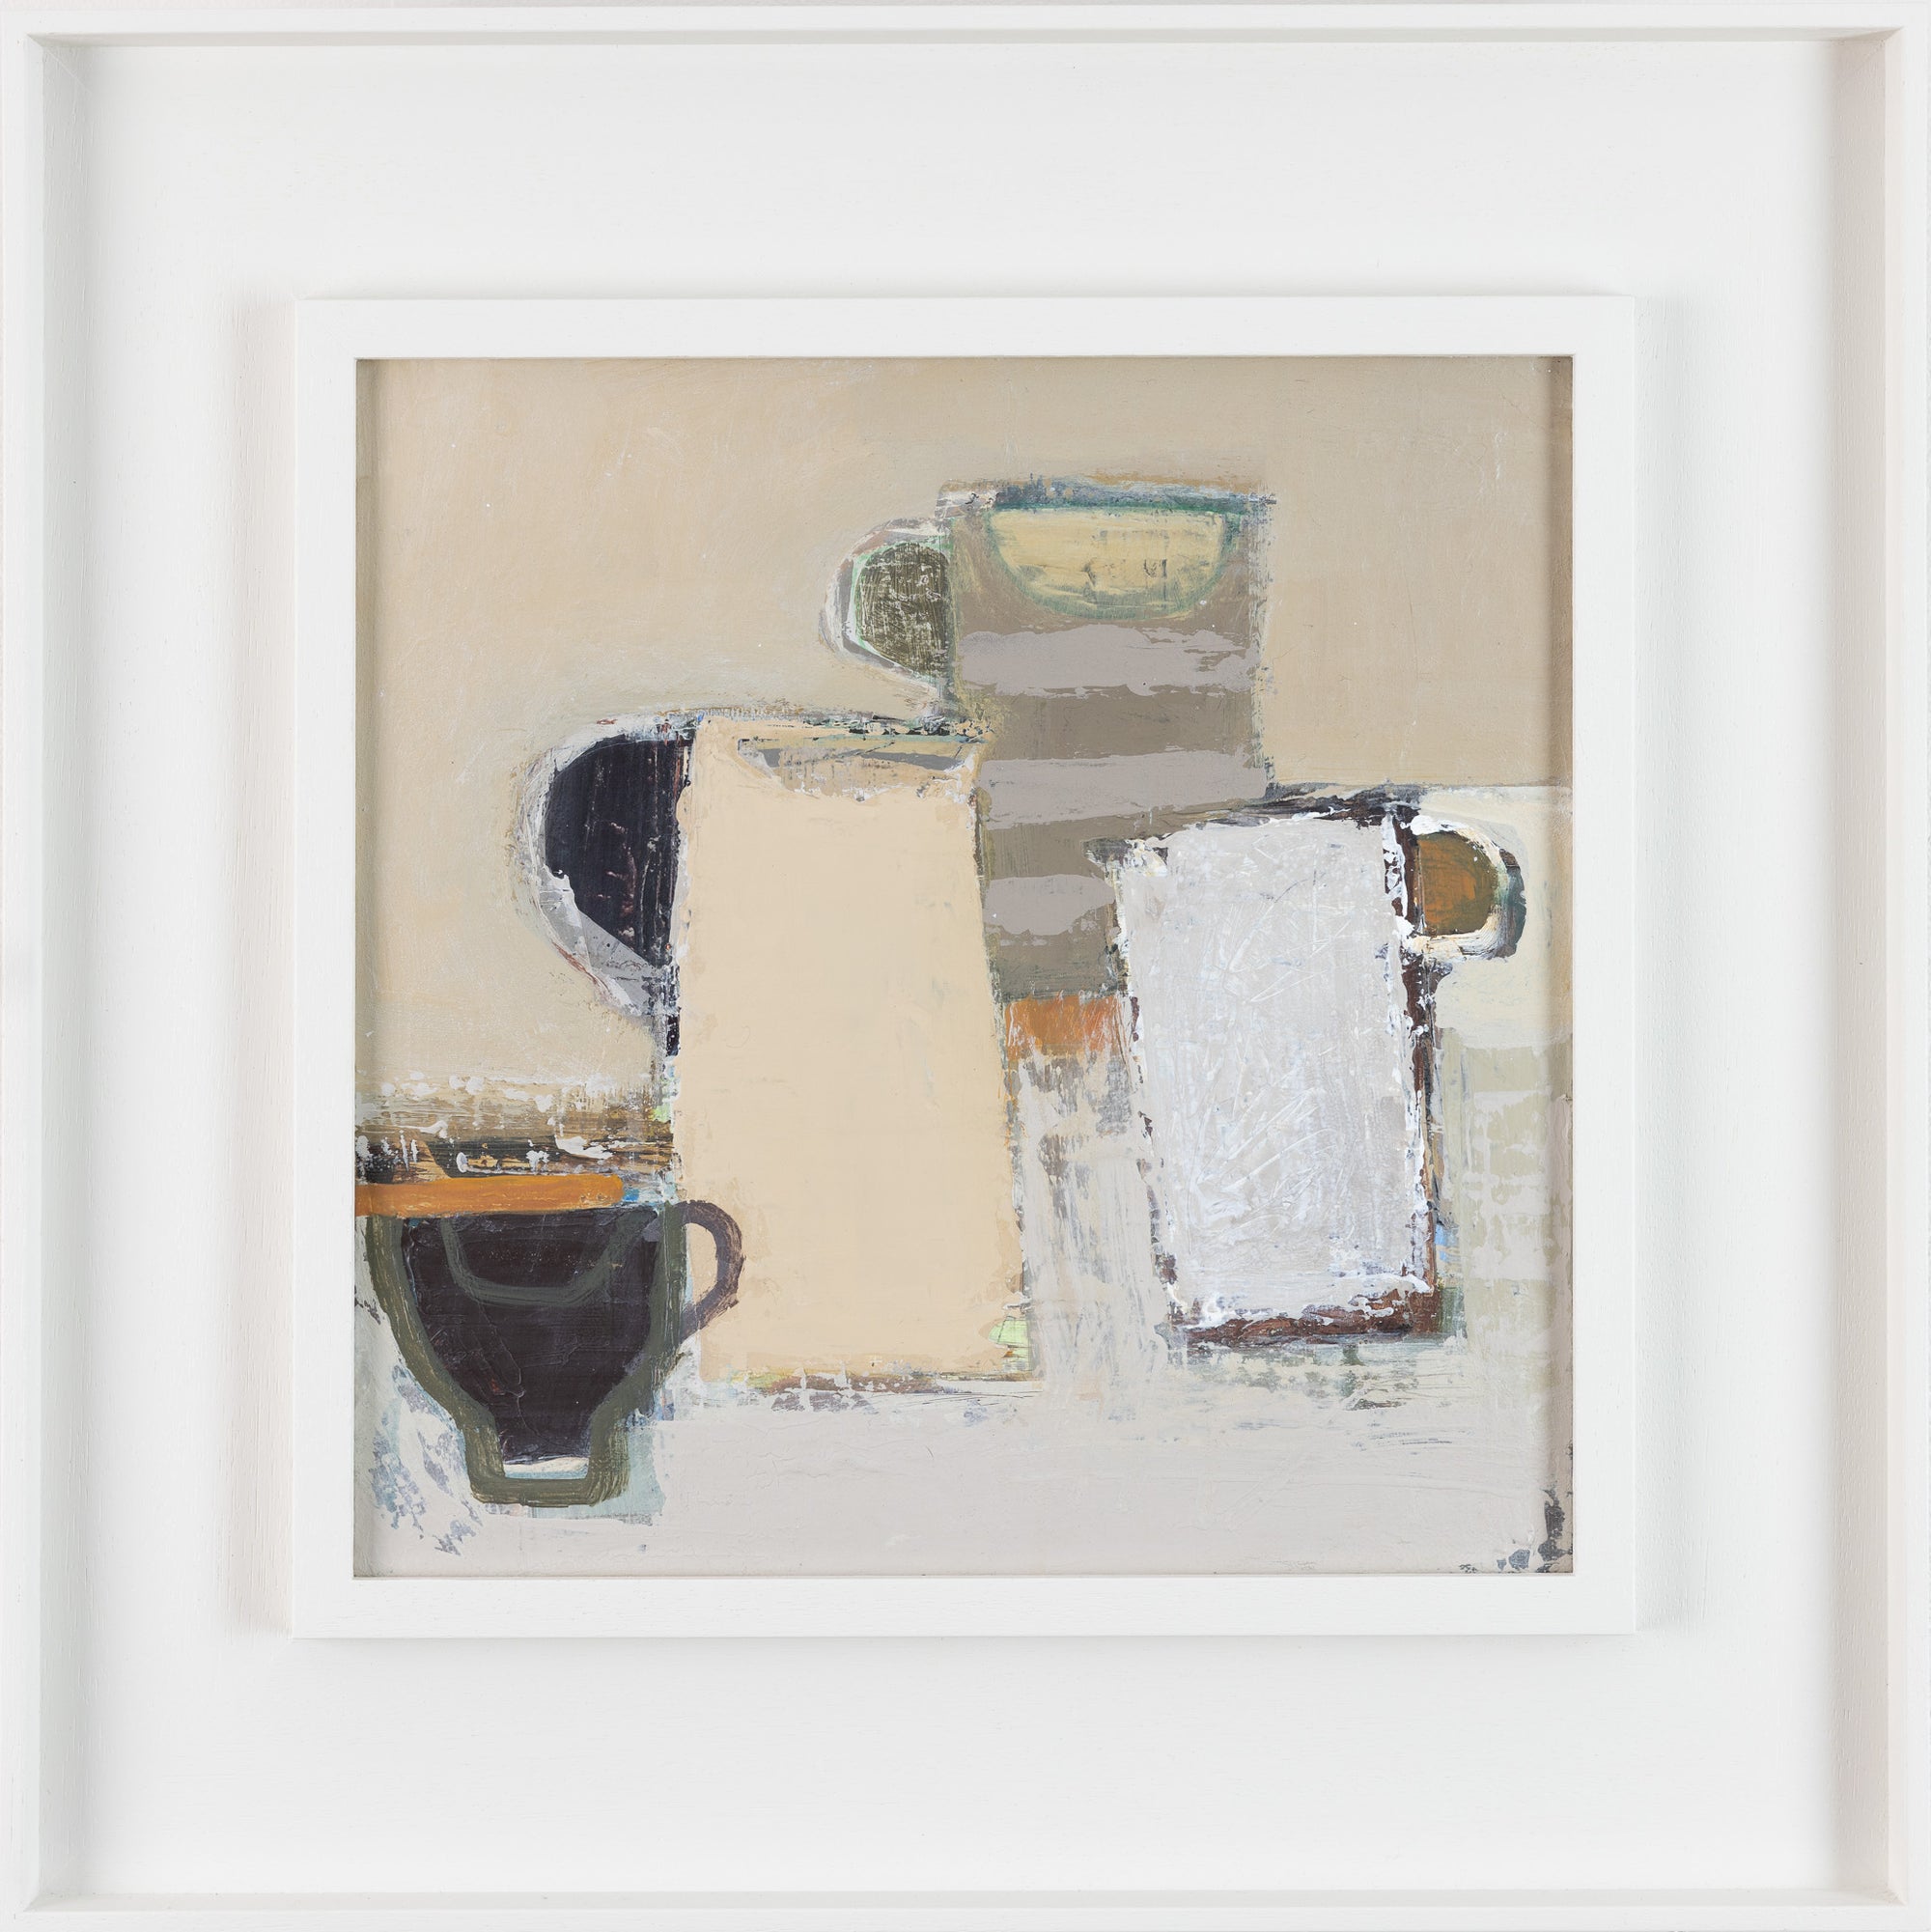 'Stoneware', by Sonia Barton, available from Padstow Gallery, Cornwall